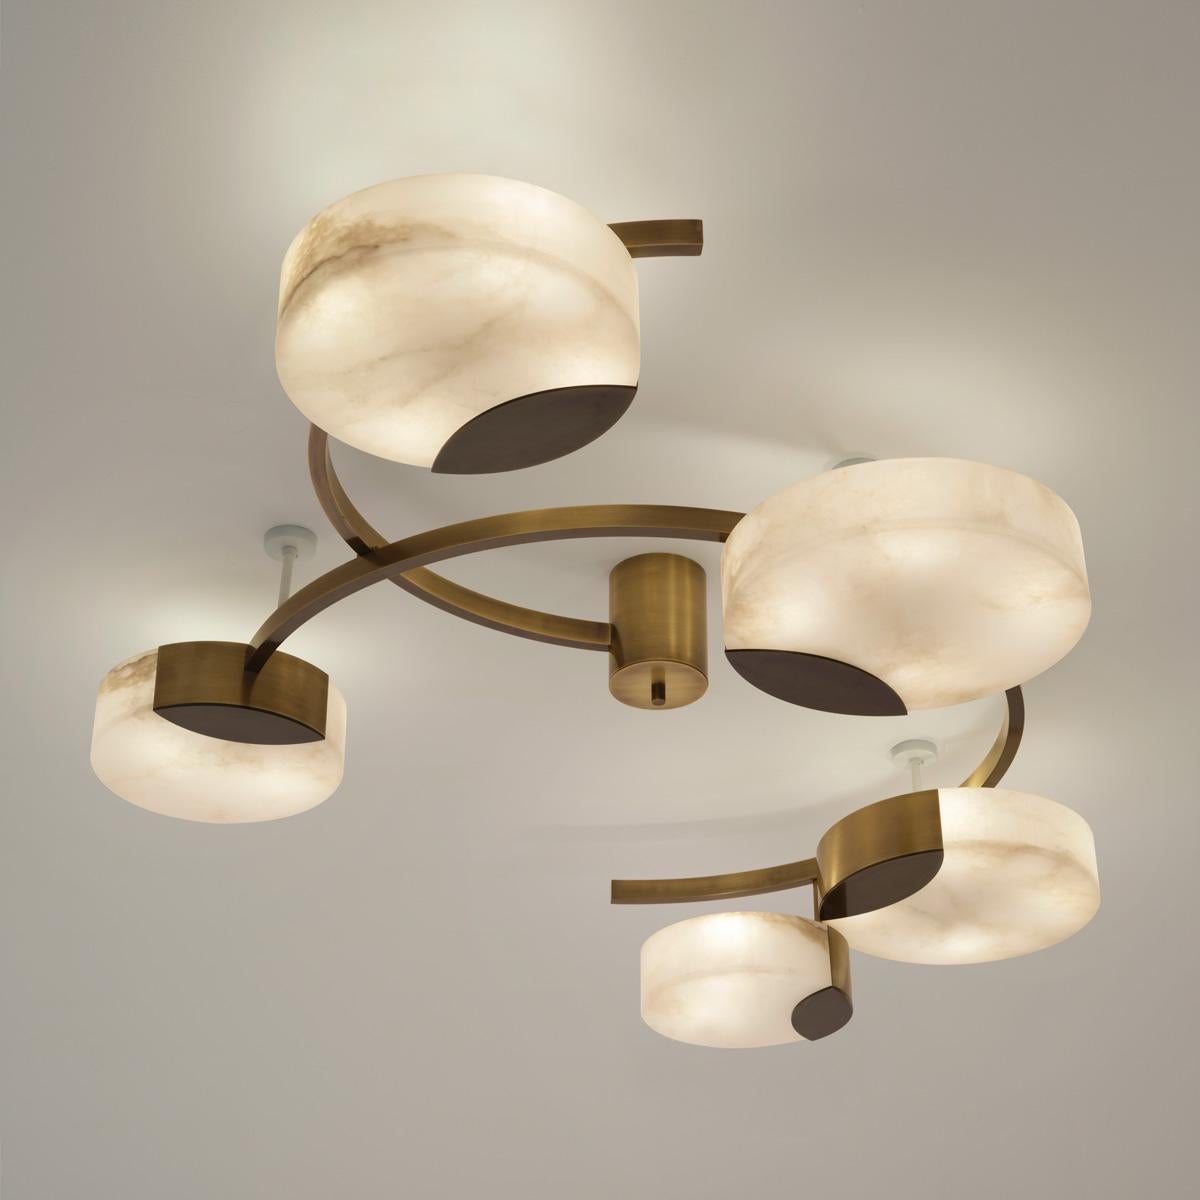 Intersecting semi circles and round alabaster shades come together in the Cloud N.5 ceiling light to create a piece that feels sculptural yet light and dynamic. The five shades are carved from a single block of Tuscan alabaster, from the town of